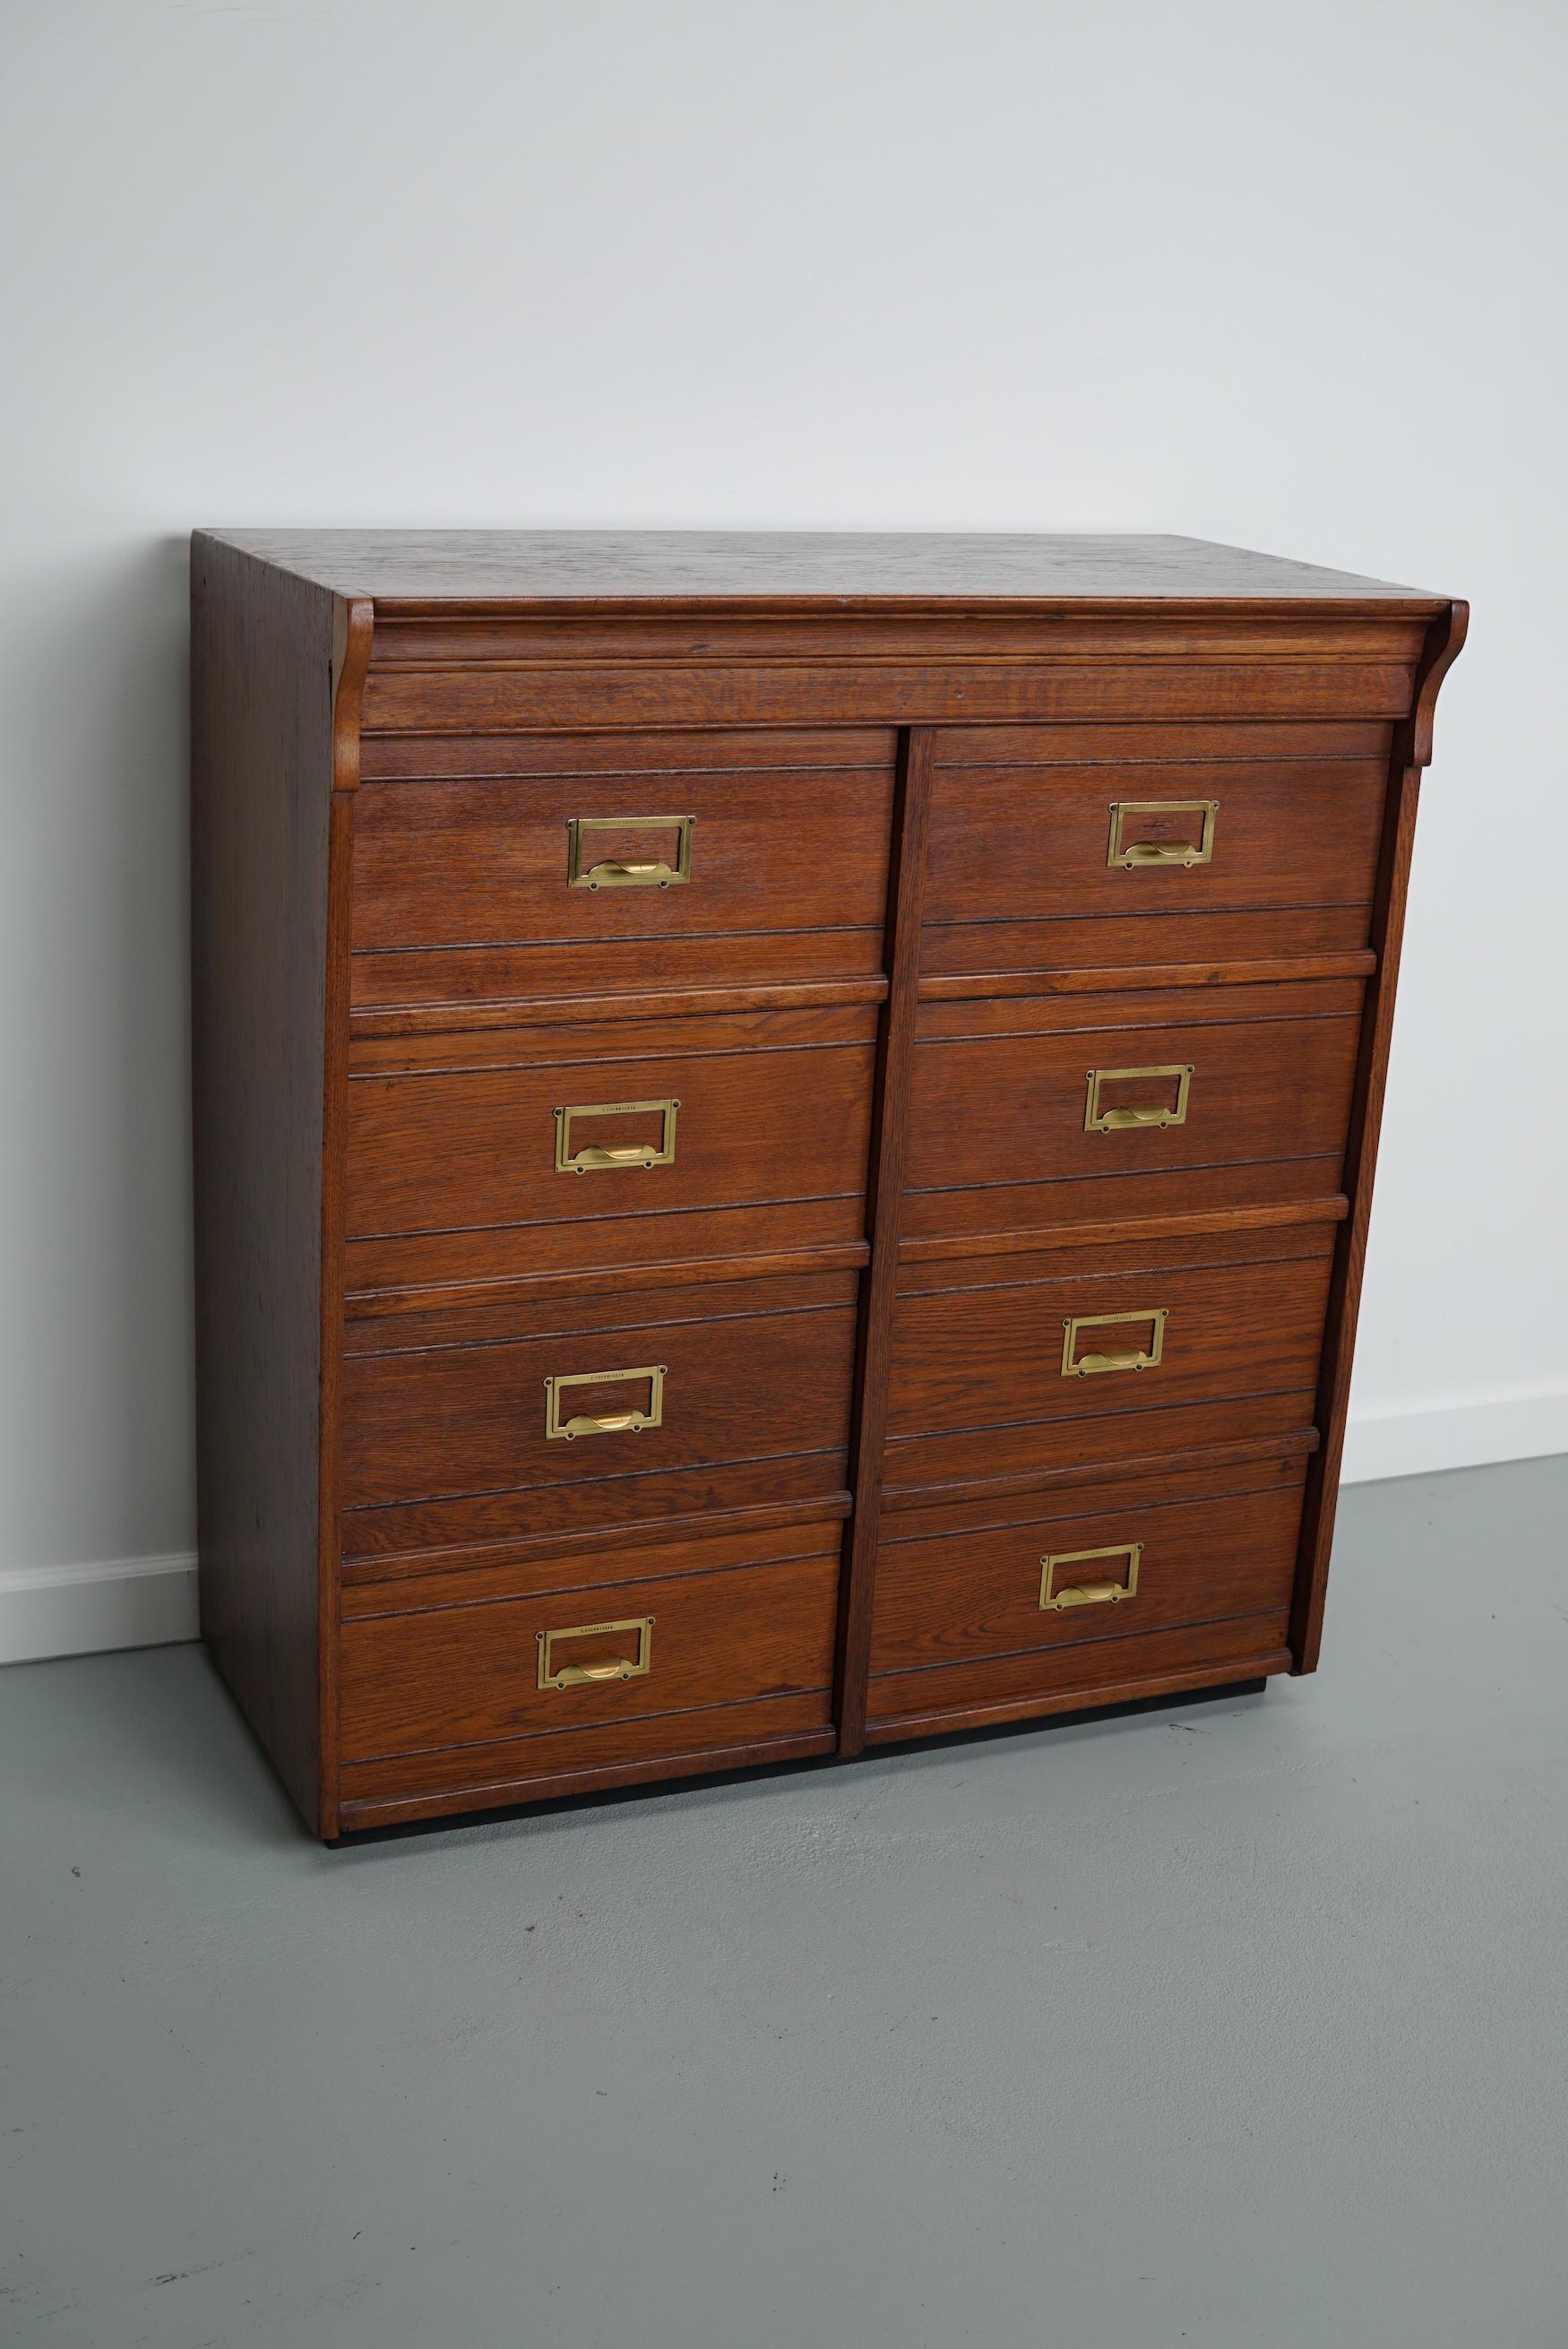 This oak filing cabinet with brass hardware was made around the 1920s in Germany by the company F.Soennecken. The interior dimensions of the compartments are: D W H 34 x 37 x 13 cm.